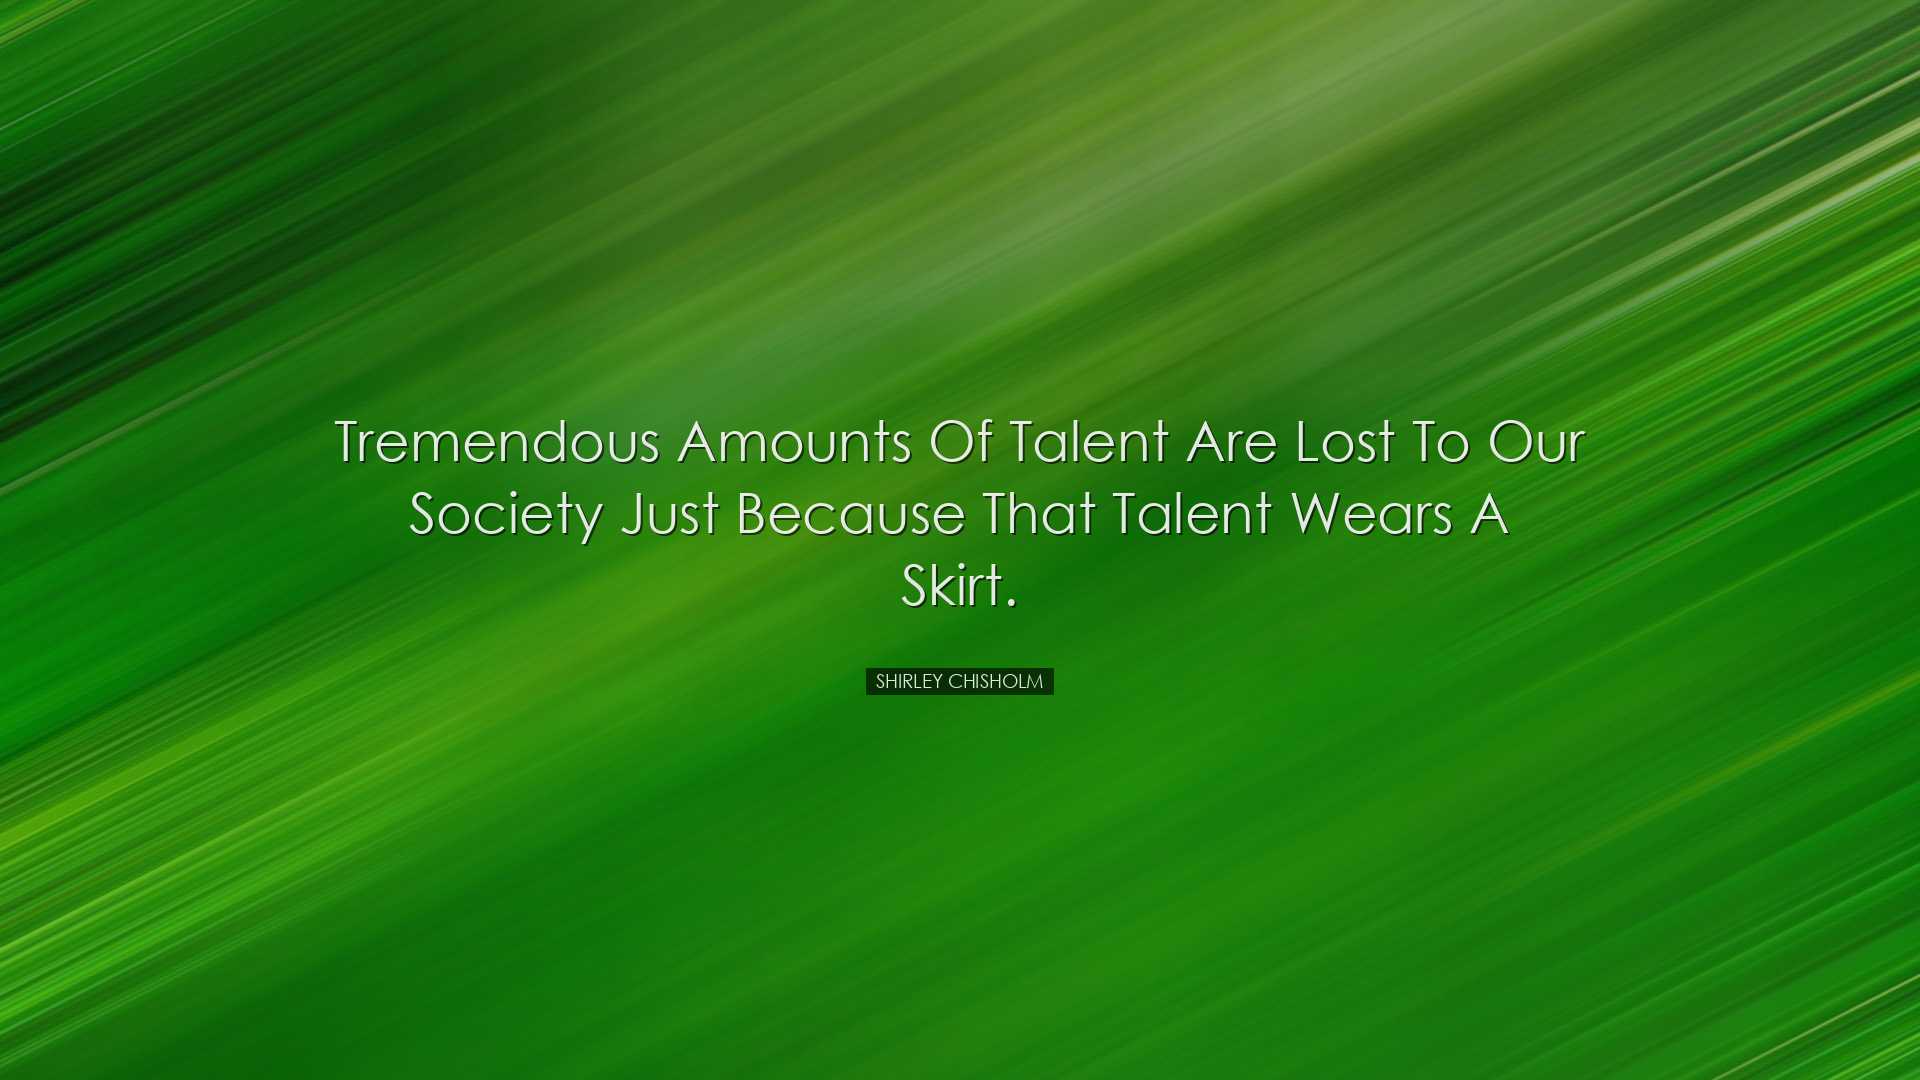 Tremendous amounts of talent are lost to our society just because